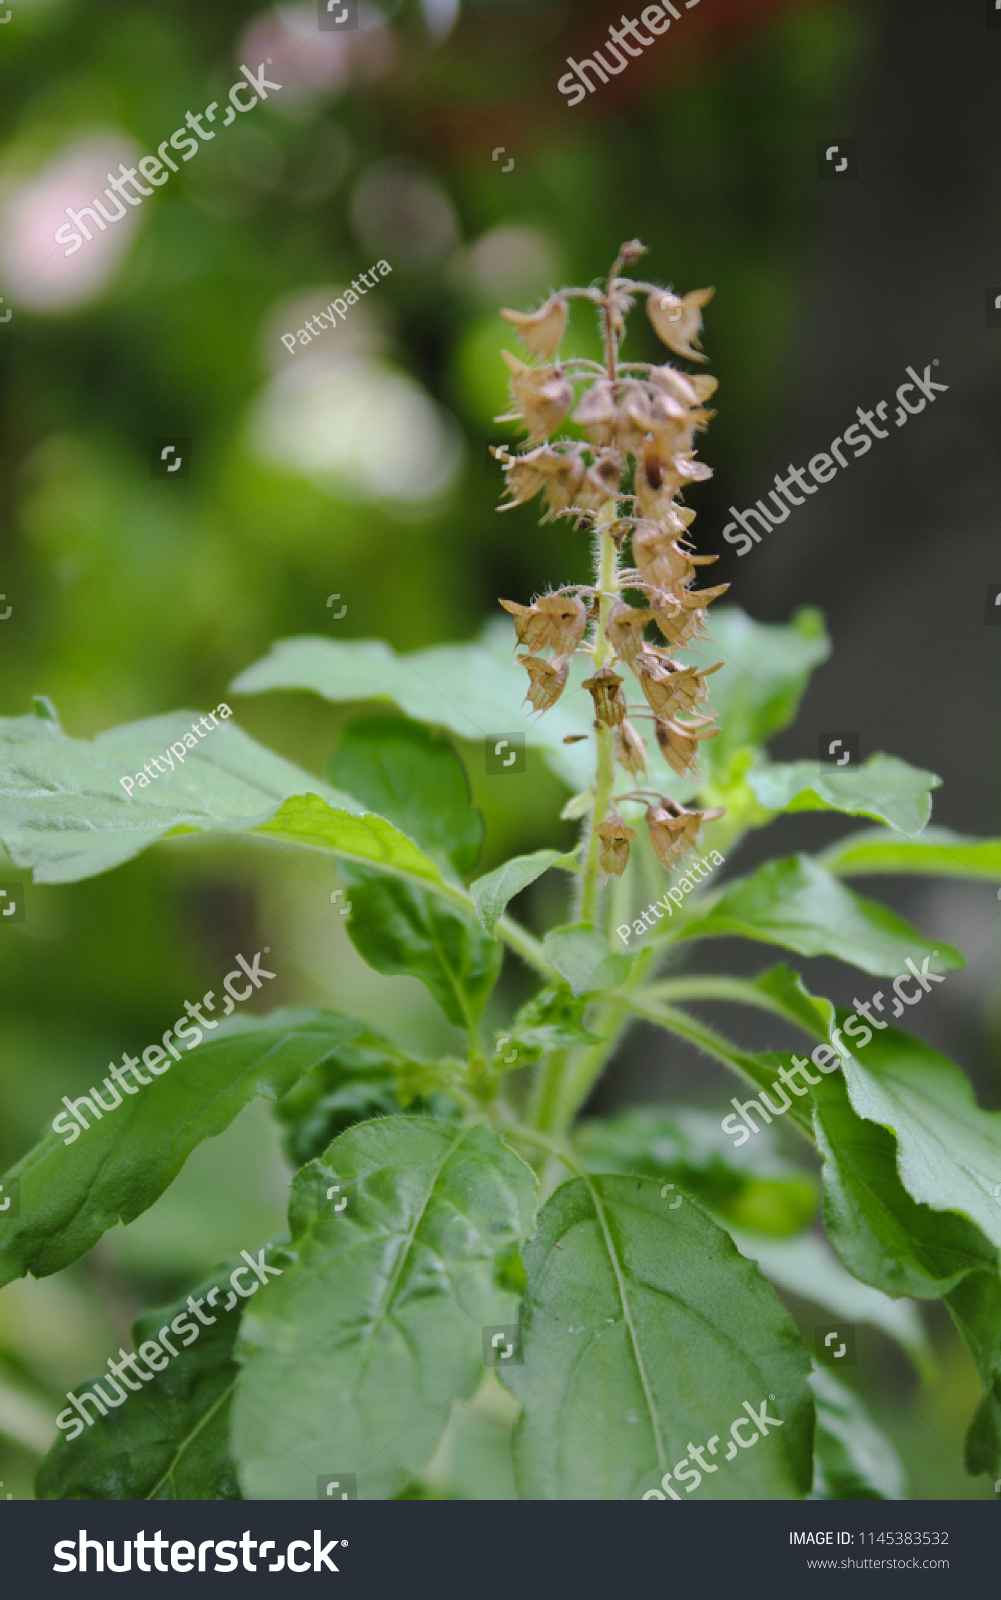 Holy basil or sacred basil, it is a herb for cooking. Favorite food in Thailand is pork with holy basil. Holy basil flower is so beautiful. #1145383532